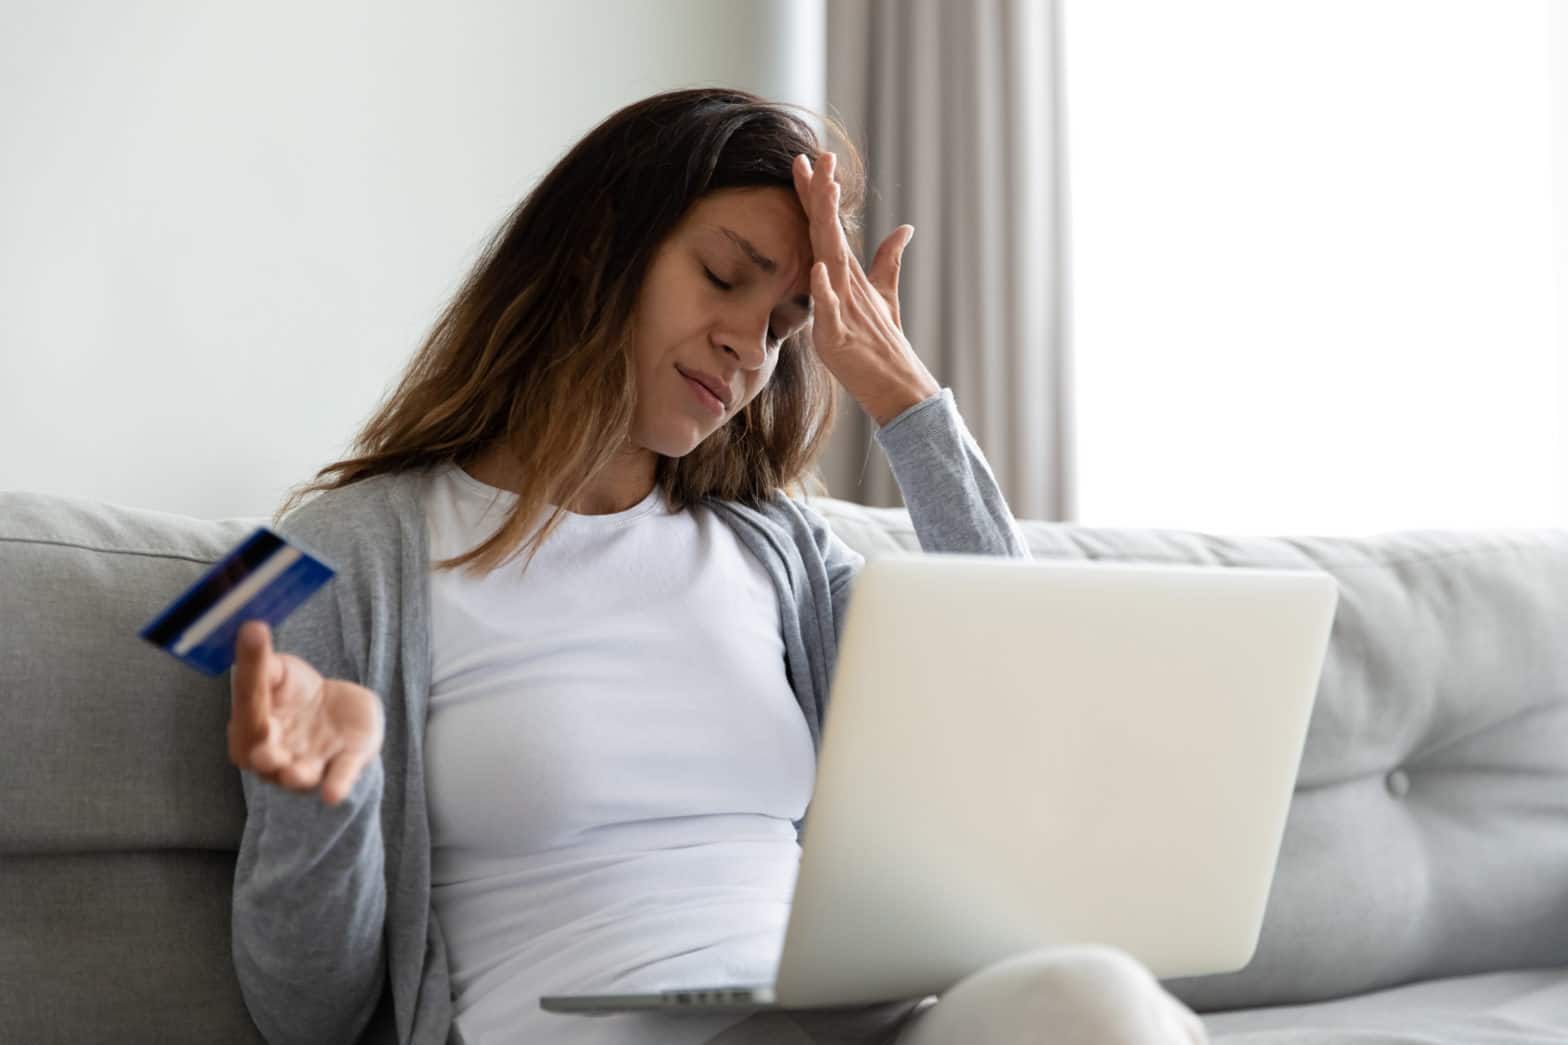 woman sitting on the sofa feels stressed due to a maxed-out credit card